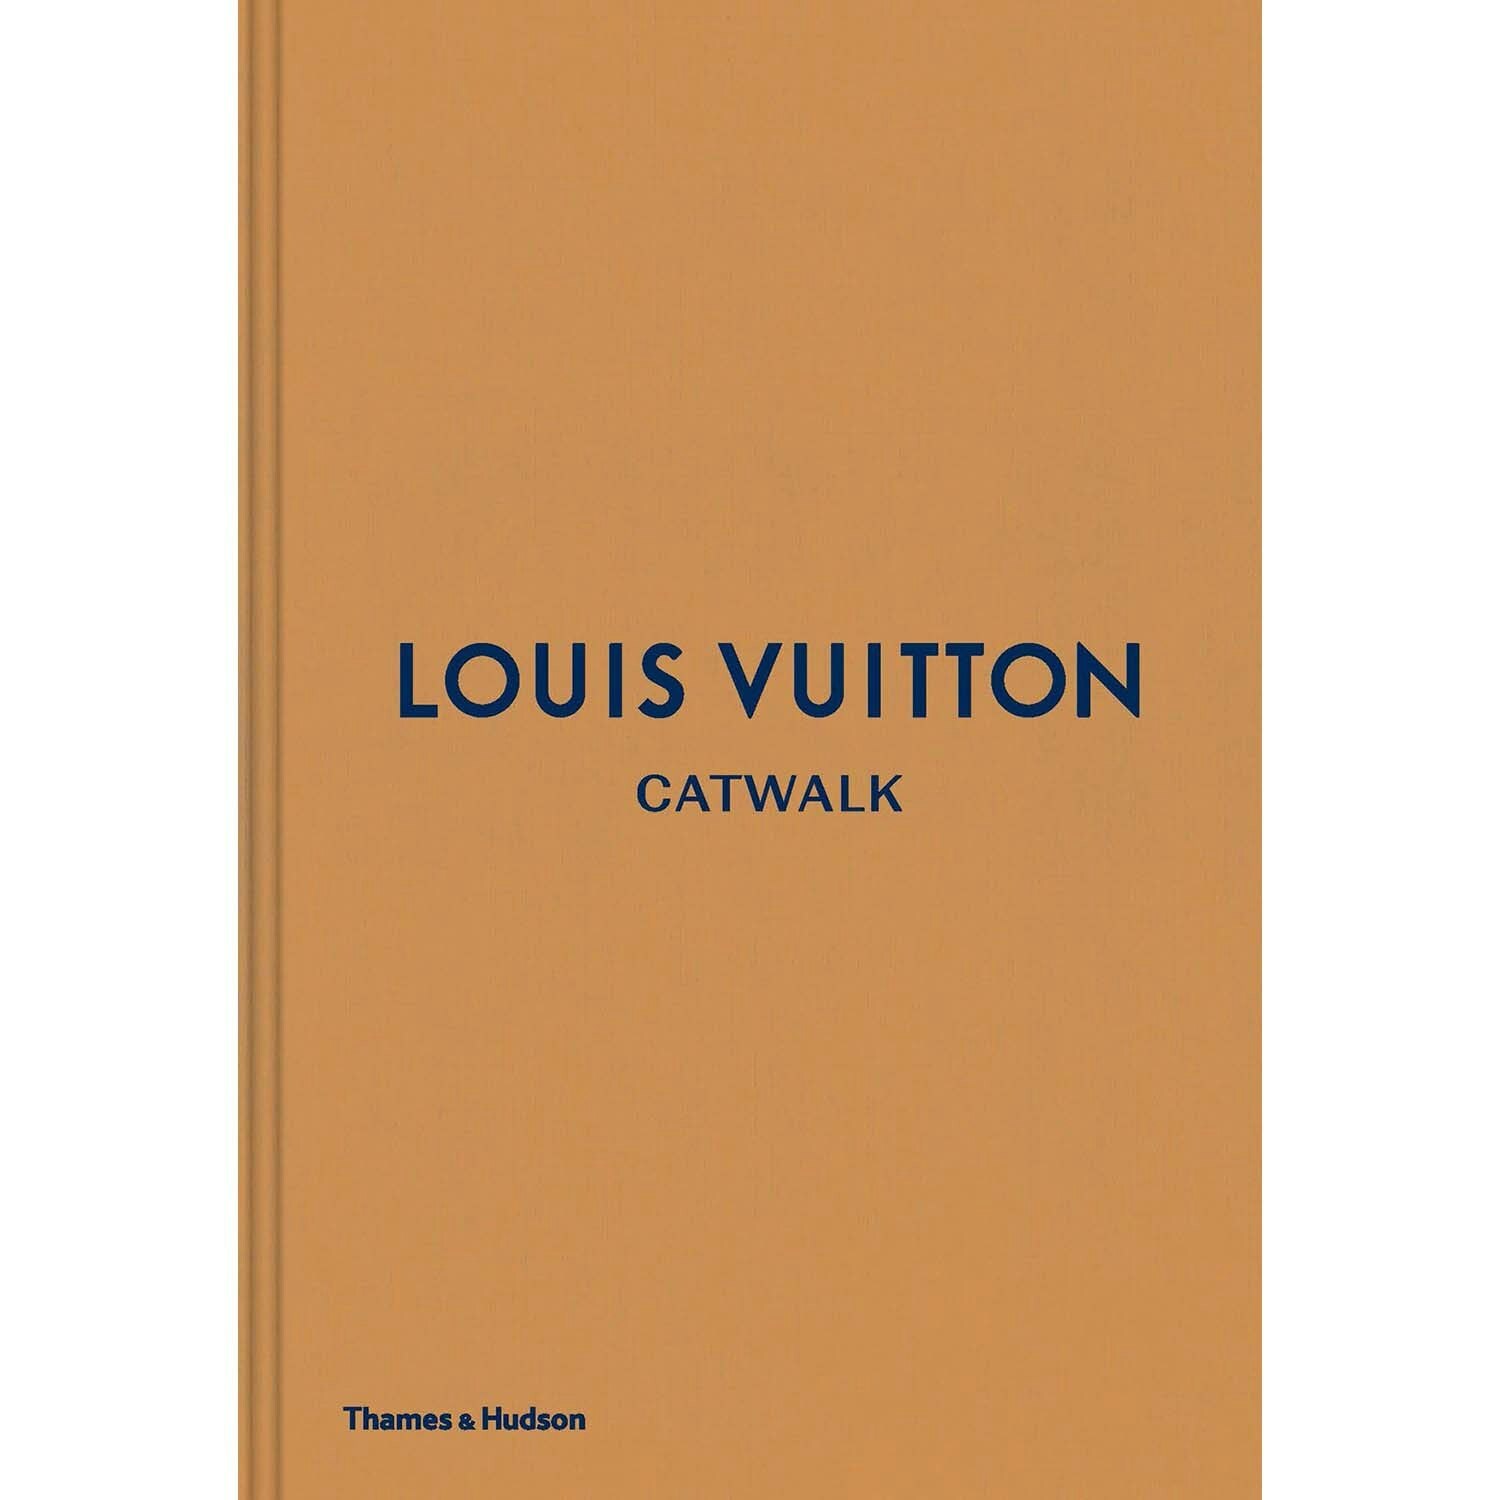 The striped trunk of the Louis Vuitton brand corresponds to the